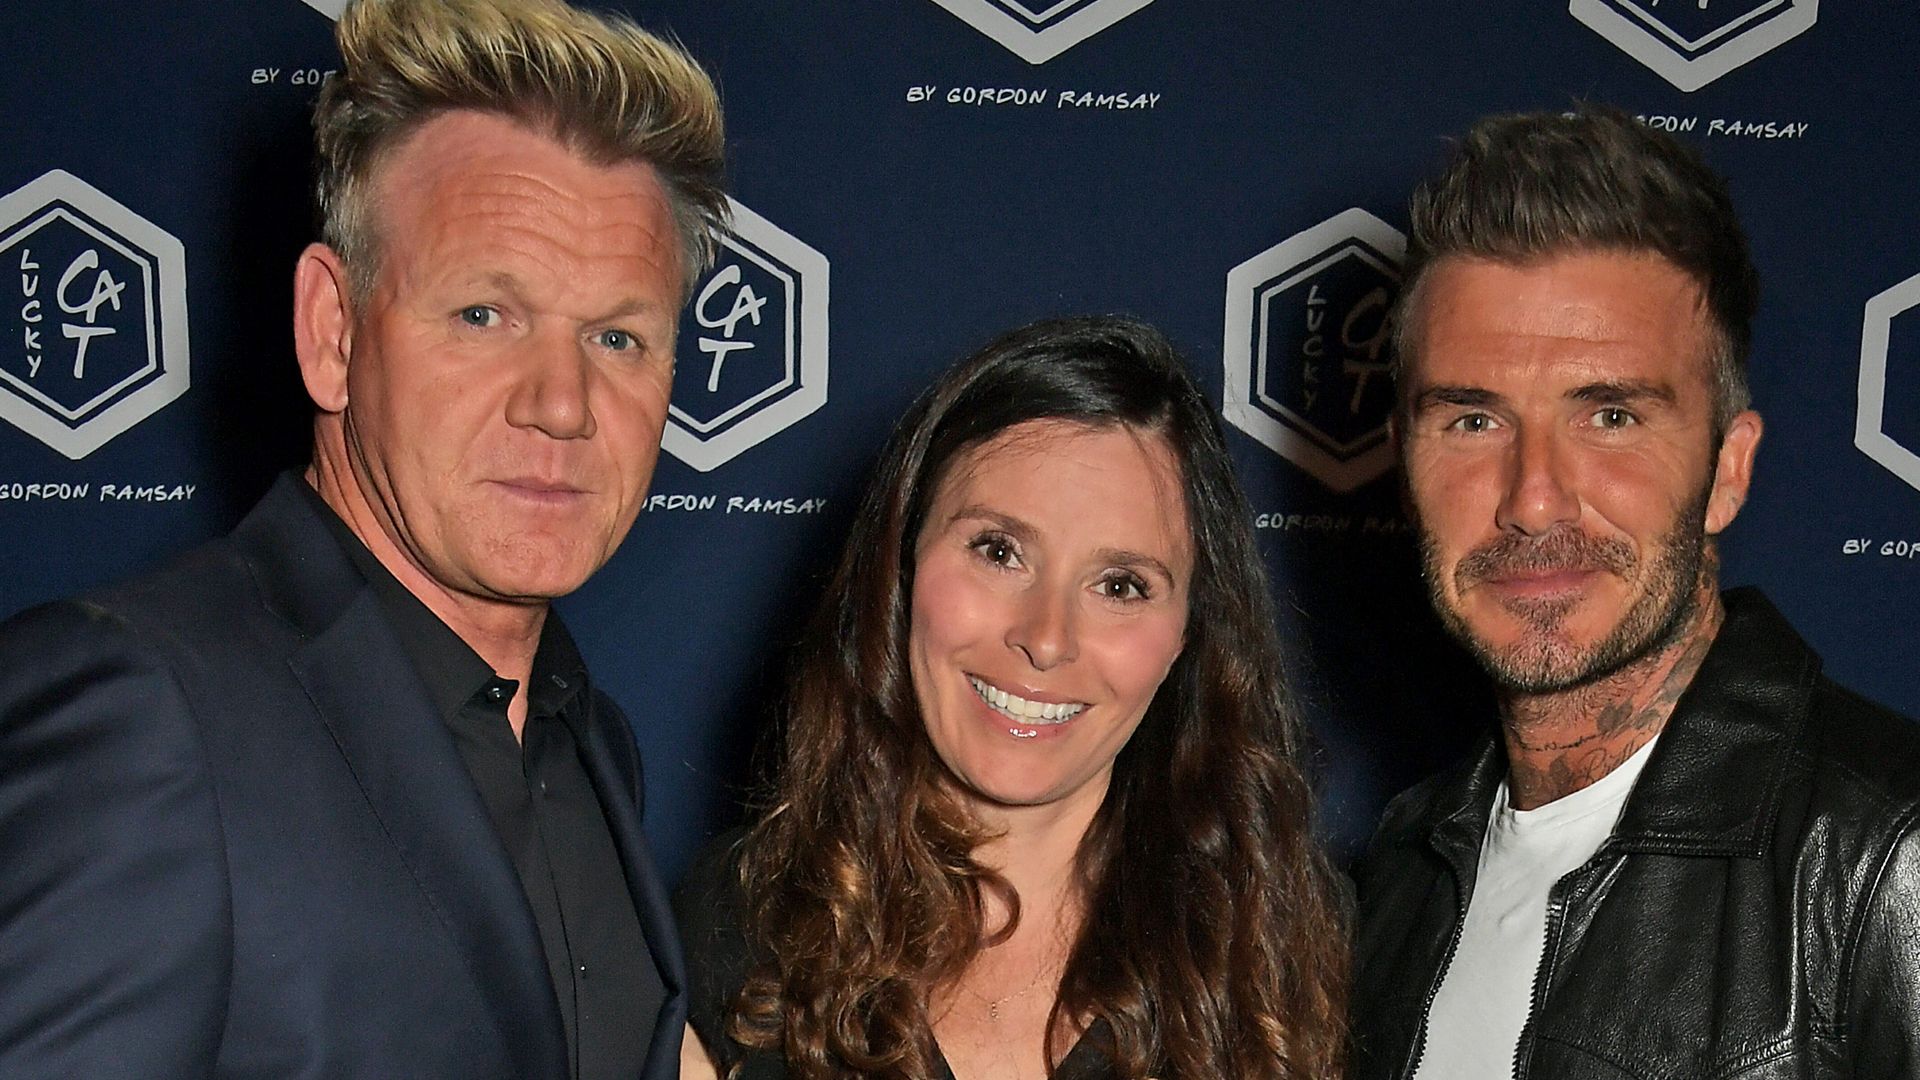 David Beckham jets off for luxury birthday trip with wife Victoria and Gordon and Tana Ramsay